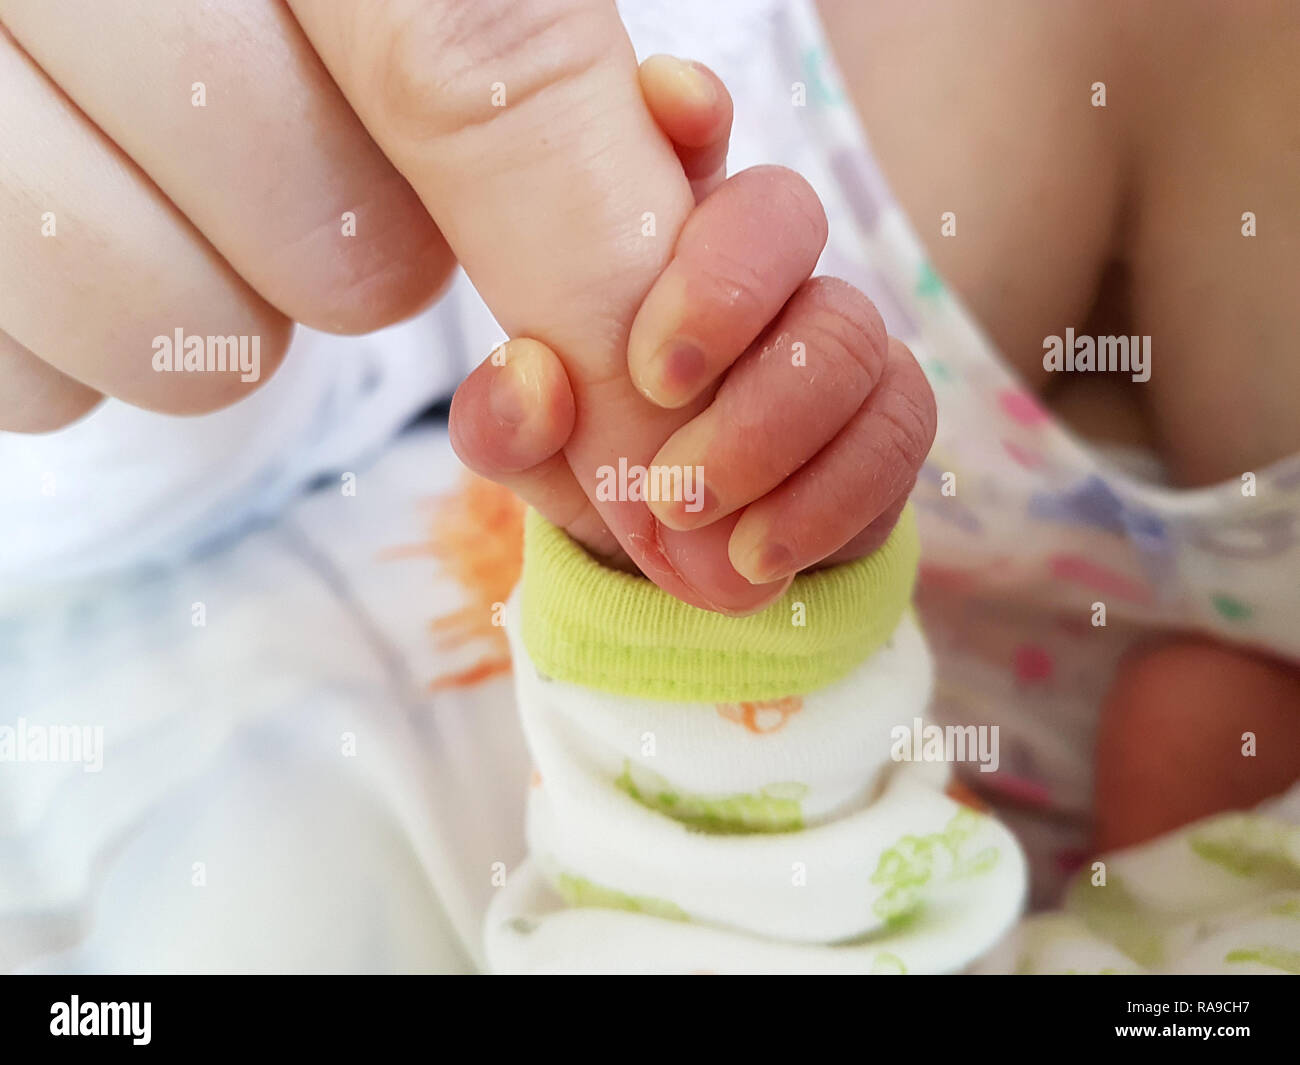 Baby hand wrapped around finger Stock Photo